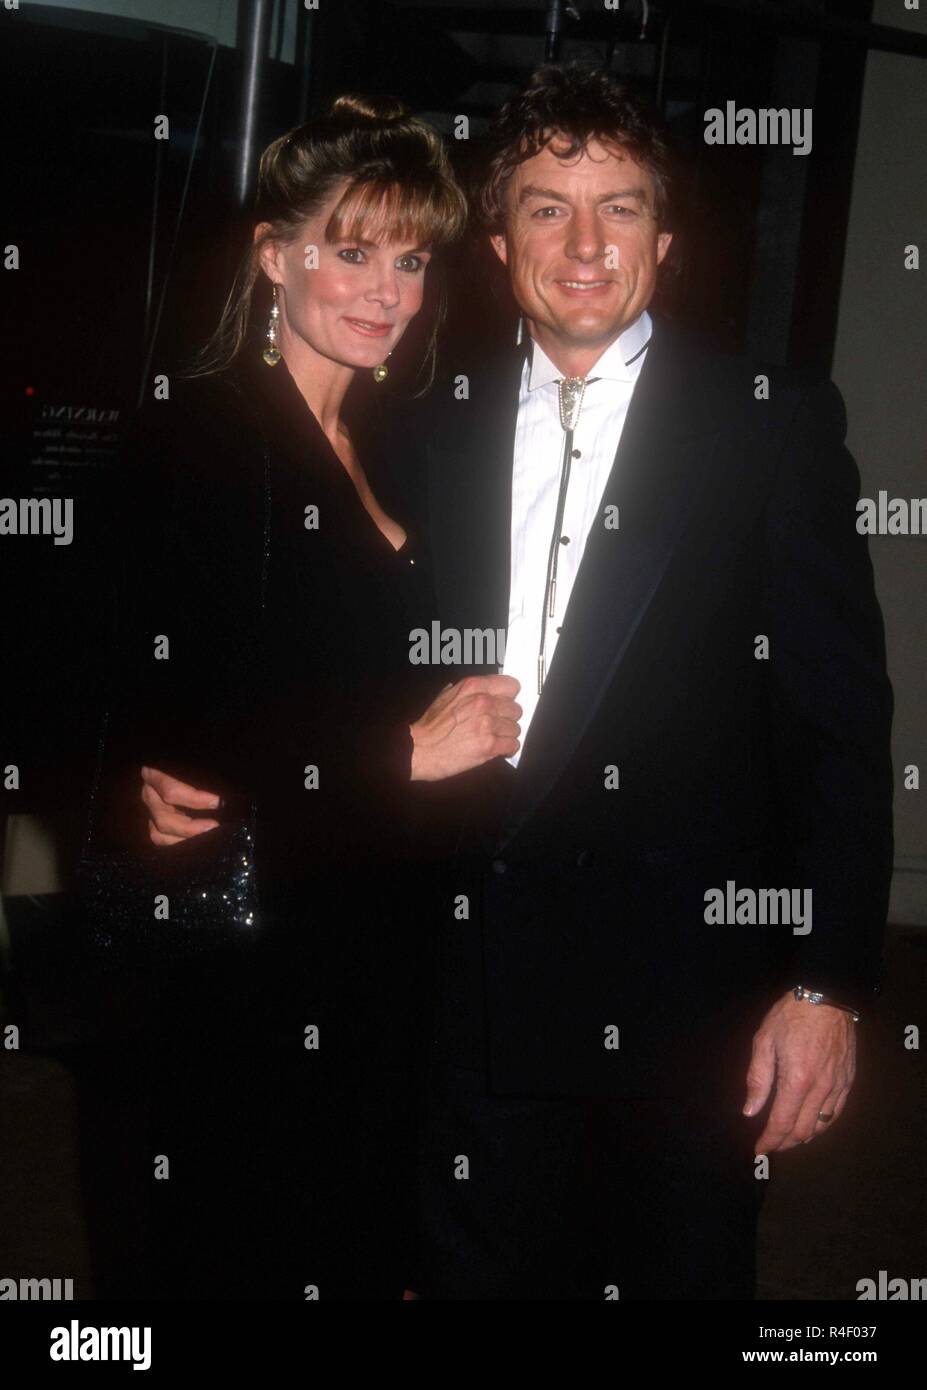 BEVERLY HILLS, CA - FEBRUARY 26: Actress Lynn Herring and actor Wayne Northrop attend the Ninth Annual Soap Opera Digest Awards on February 26, 1993 at the Beverly Hilton Hotel in Beverly Hills, California. Photo by Barry King/Alamy Stock Photo Stock Photo